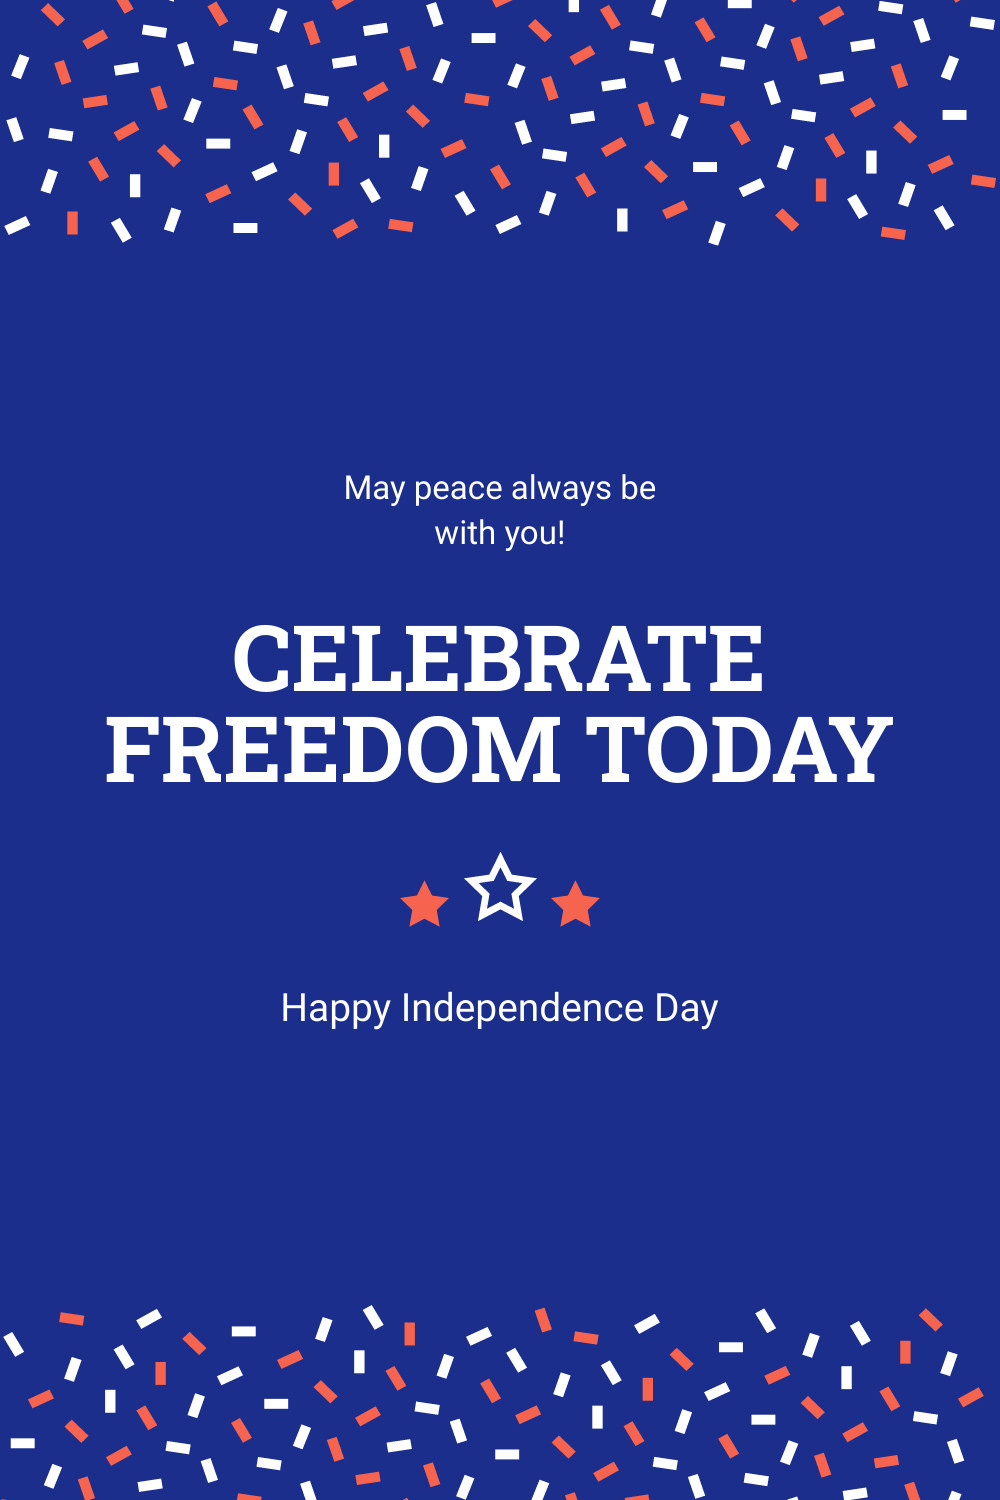 Celebrate Freedom on Independence Day Facebook Cover 820x360